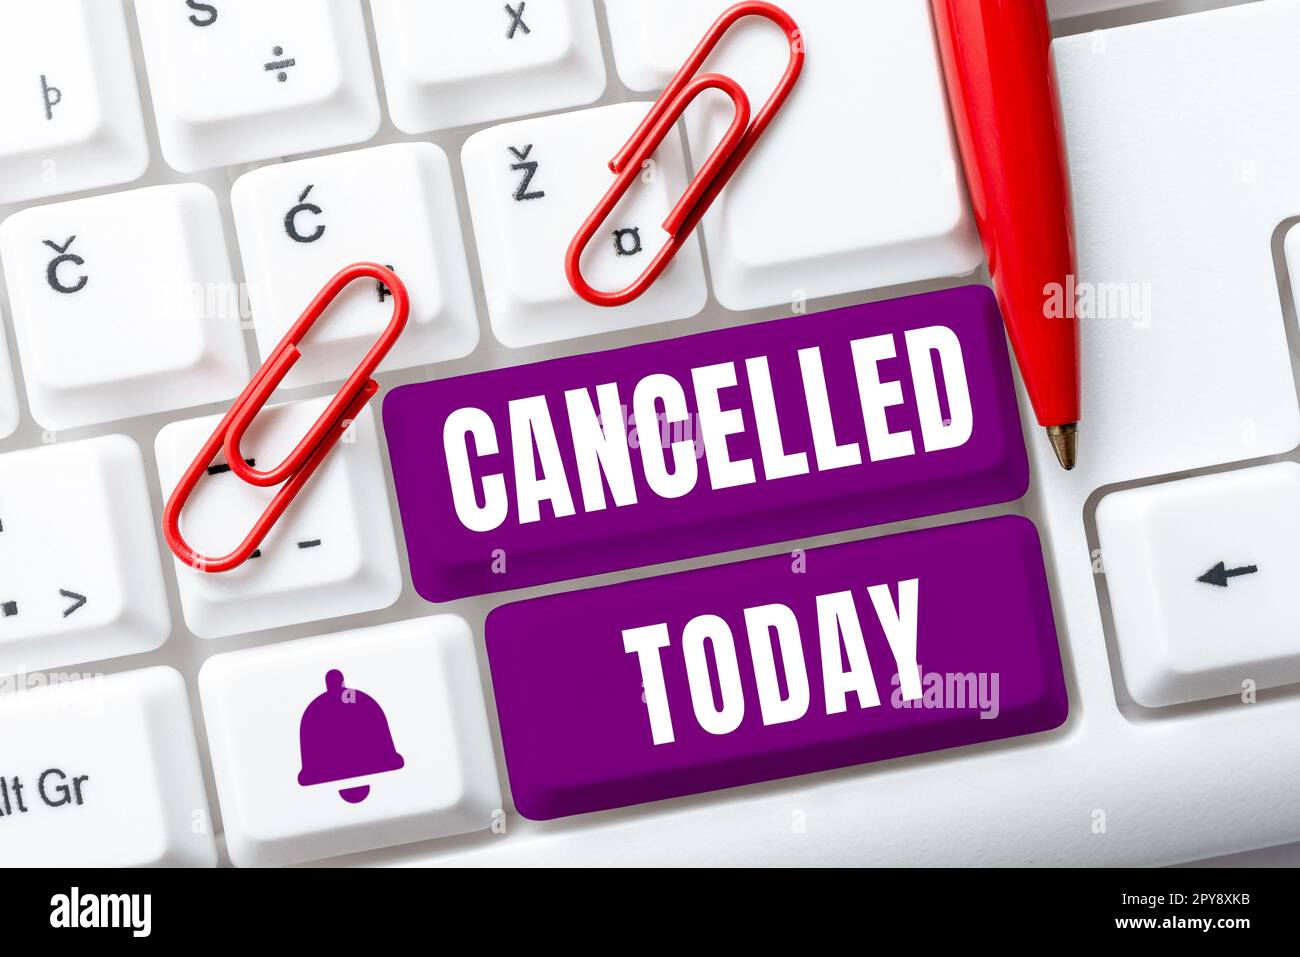 Sign displaying Cancelled. Business showcase decide or announce that planned event will not take place Stock Photo